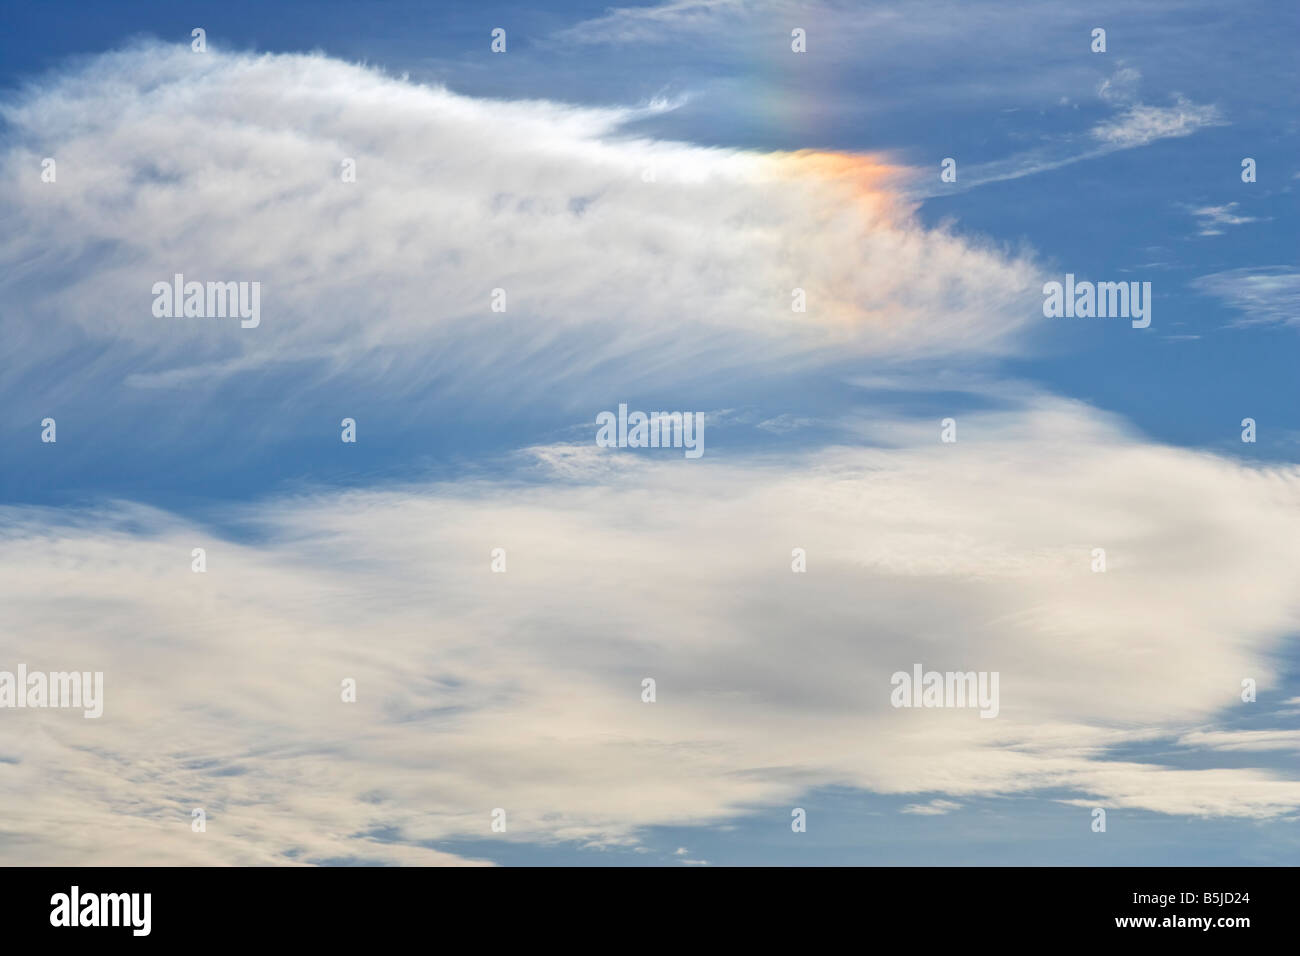 High altitude clouds and a rainbow coloured sun dog or parhelion caused by ice crystals refracting sunlight Stock Photo